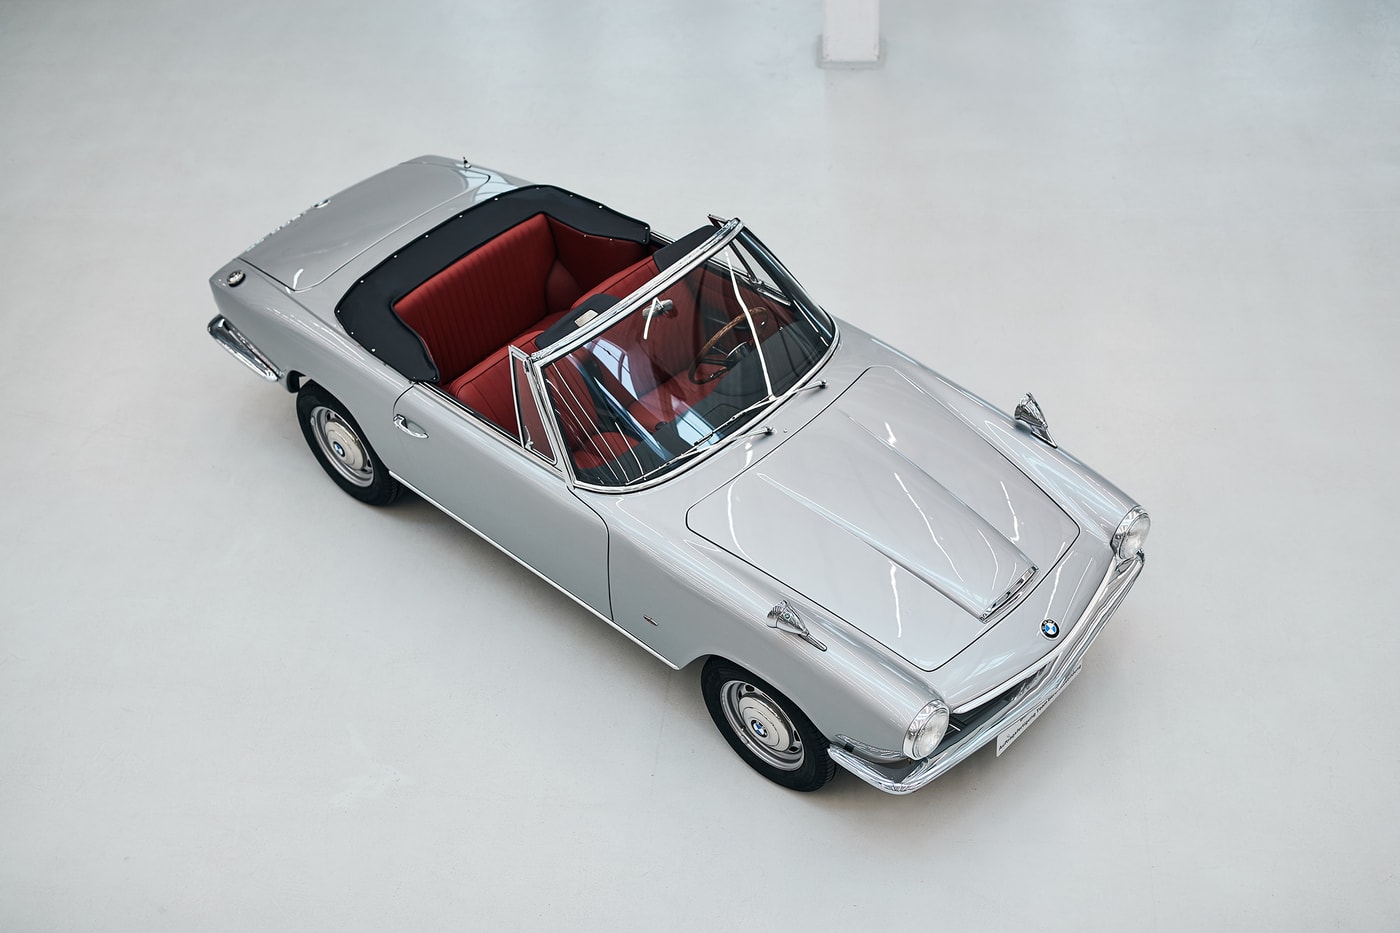 BMW Resurrects the Only Remaining 1600 GT Convertible